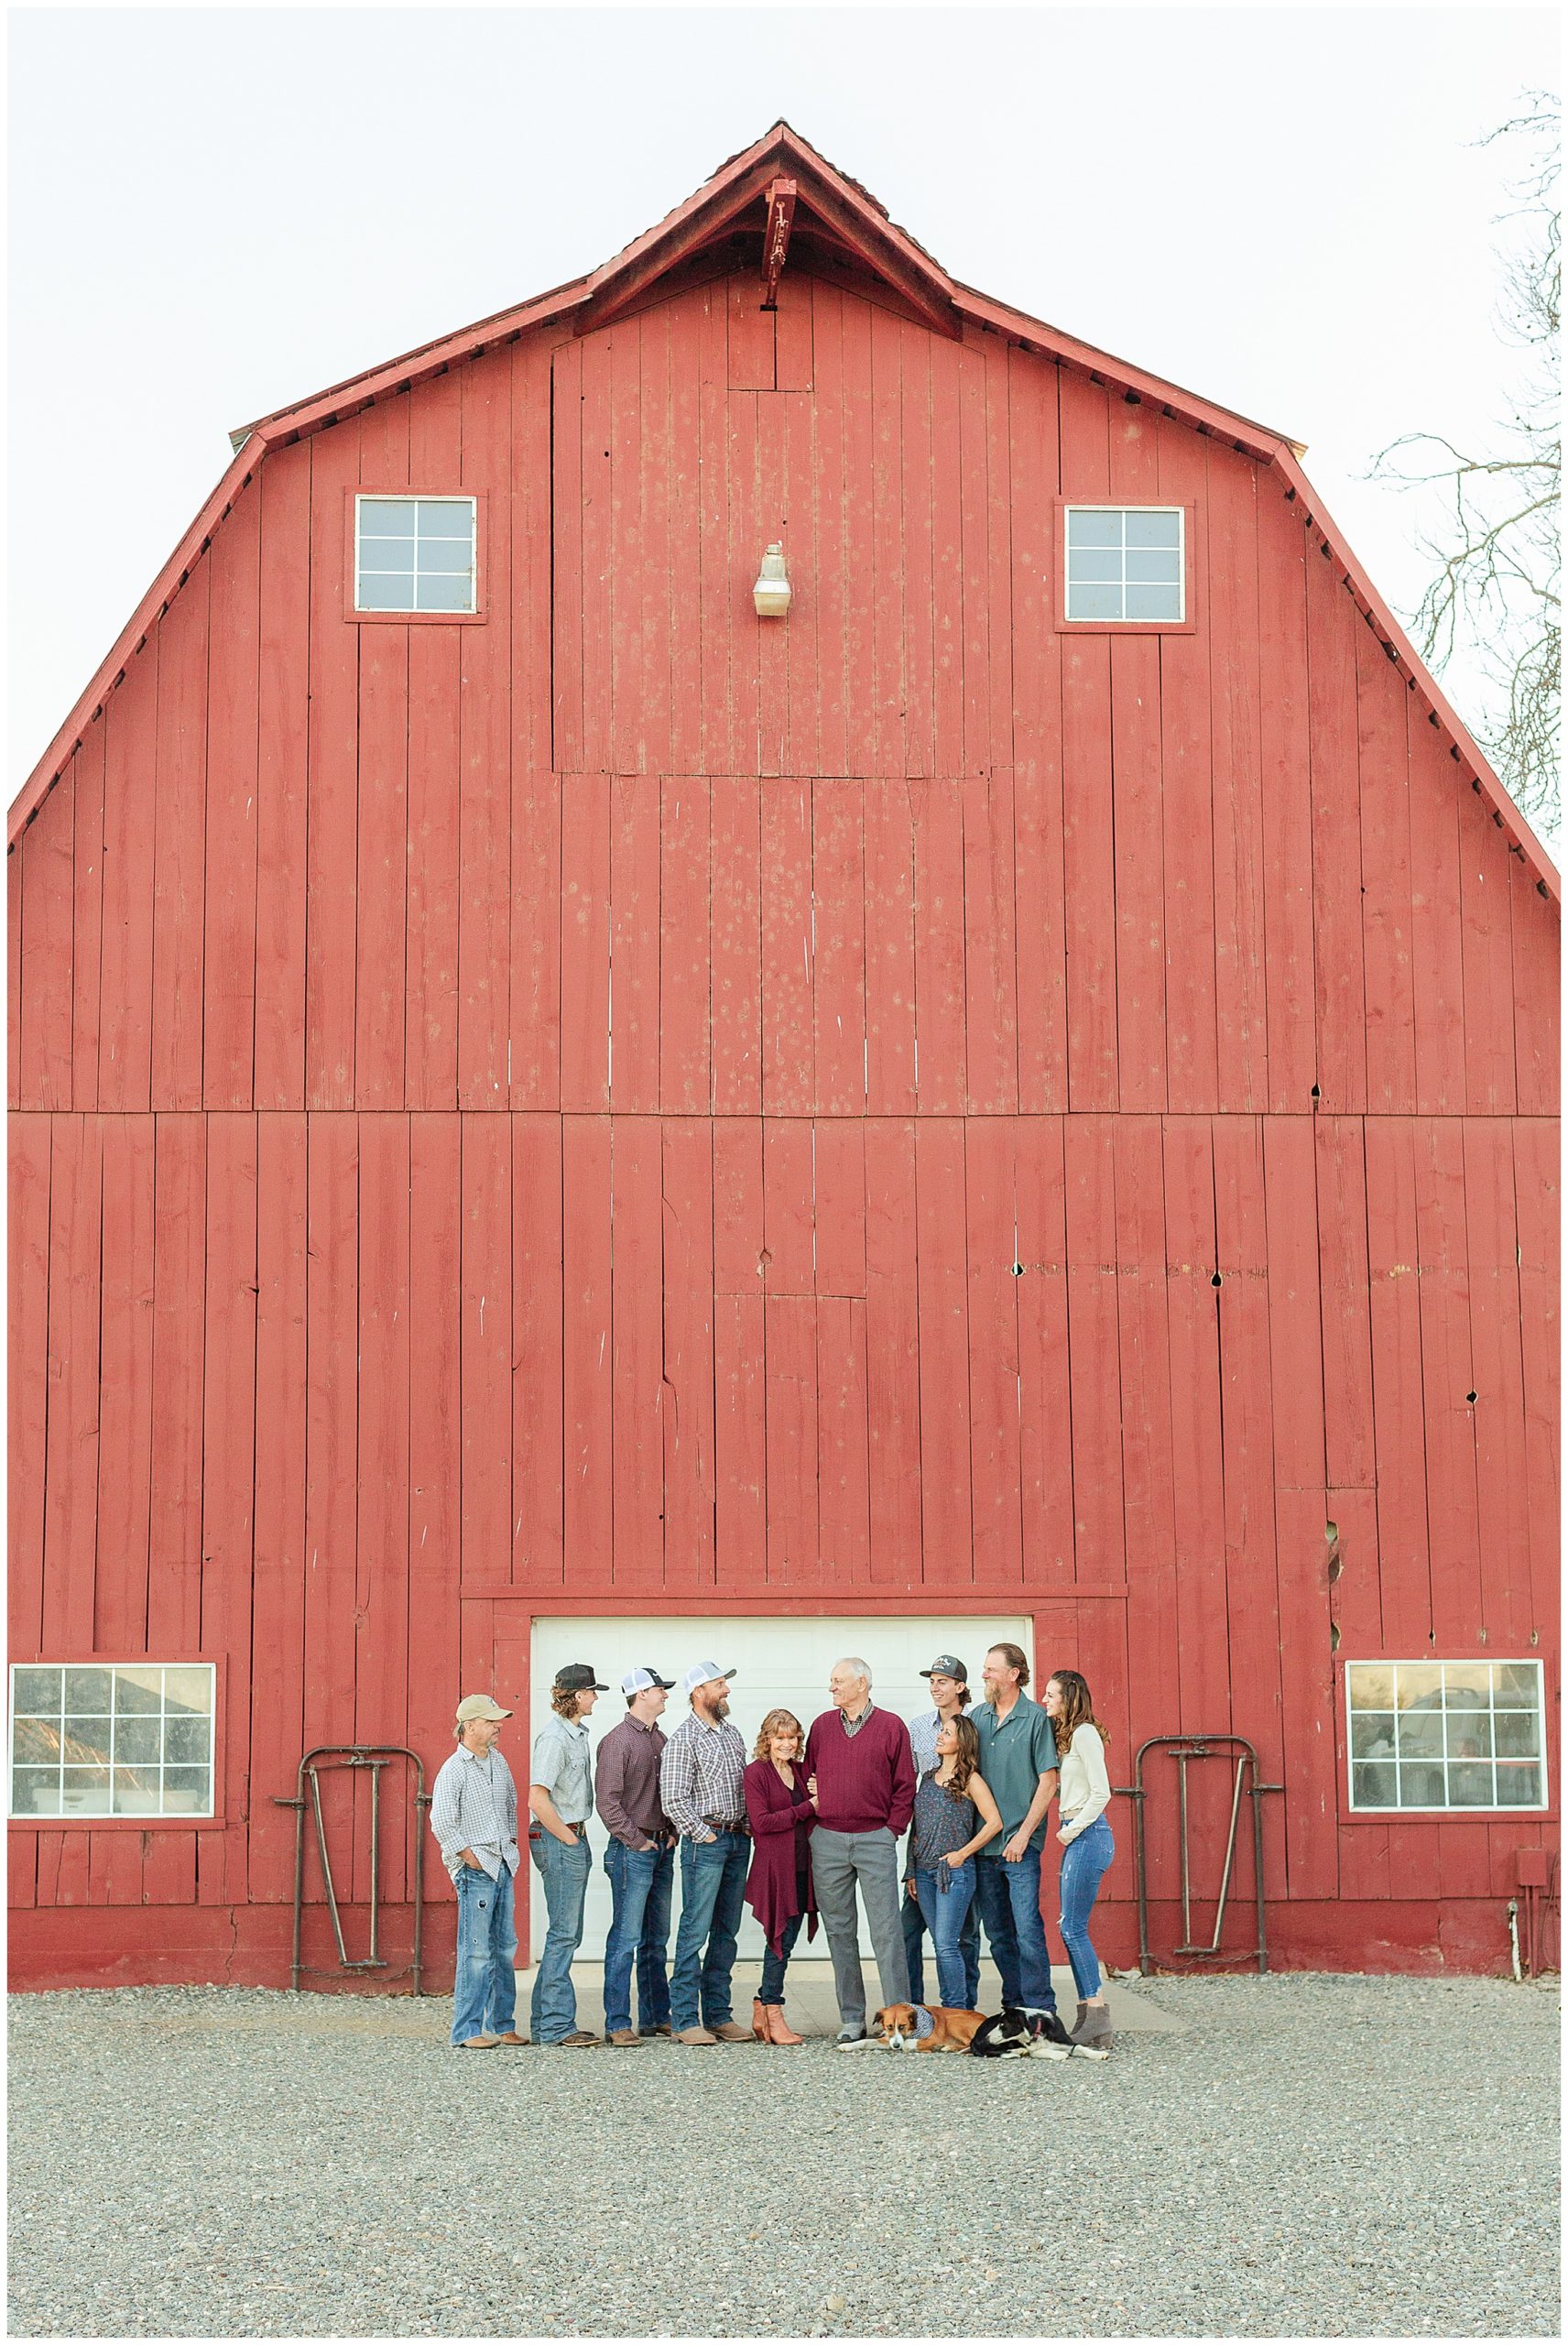 Extended Family with Red Barn | Mary Jo + Dennis